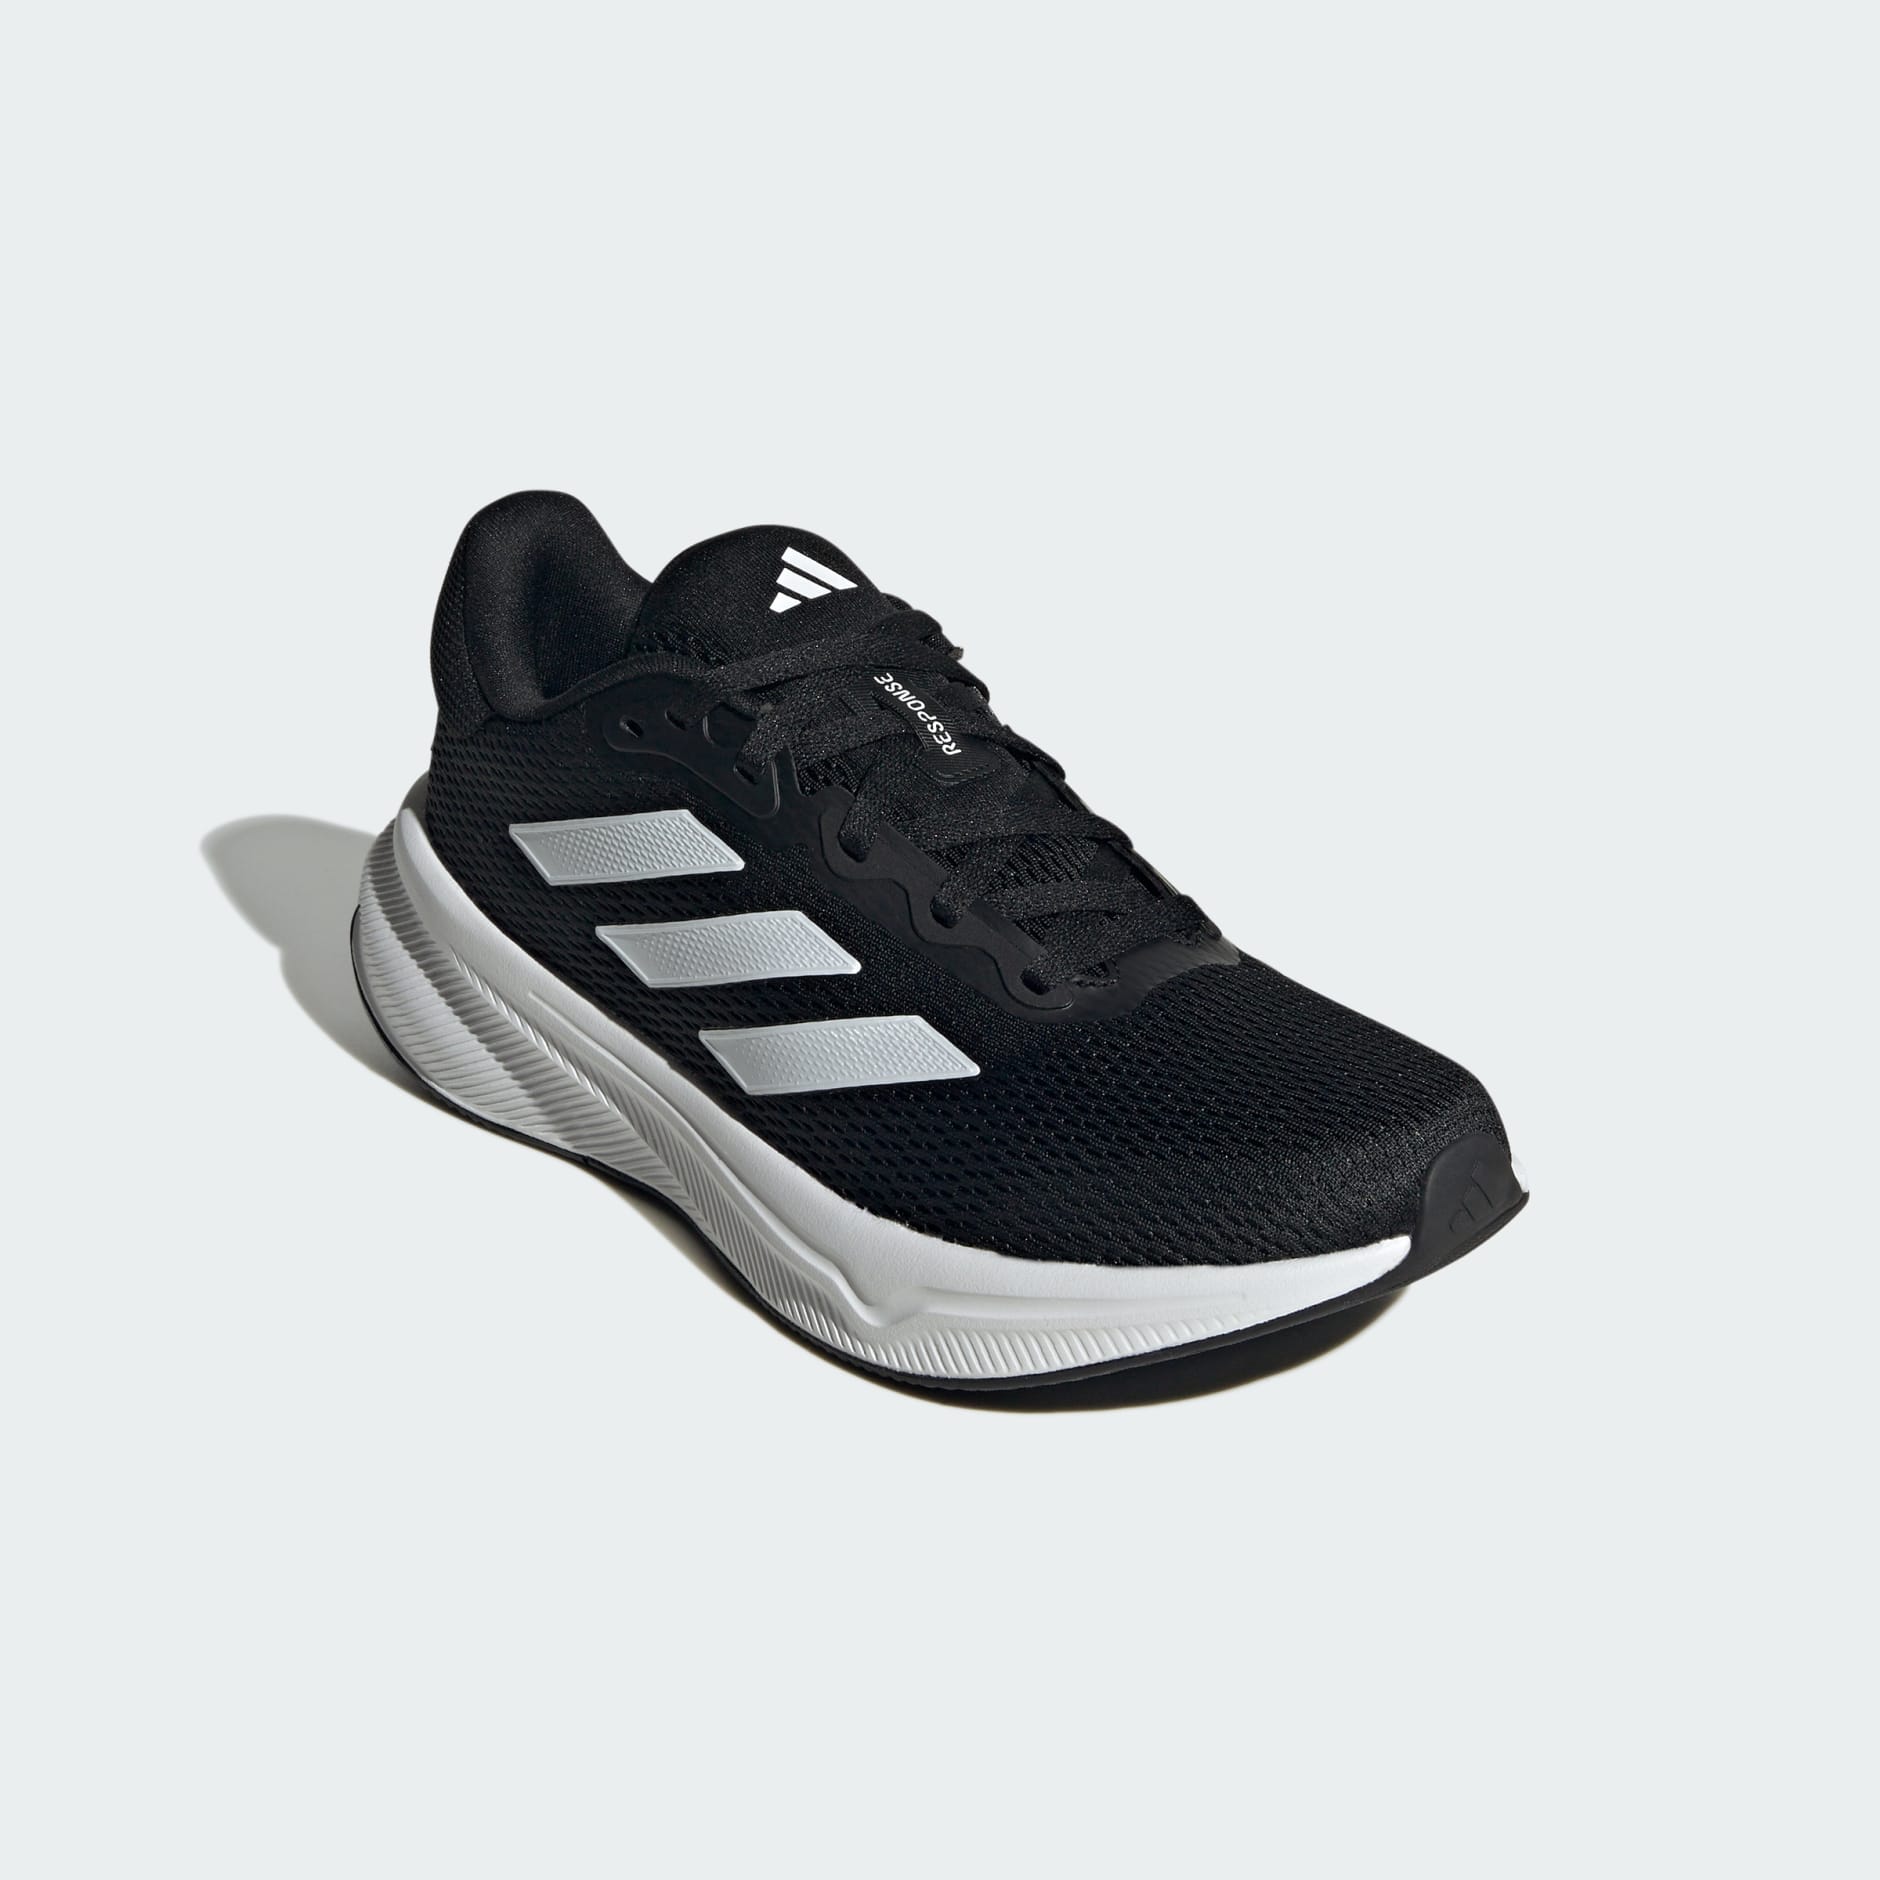 Shoes - Response Shoes - Black | adidas South Africa